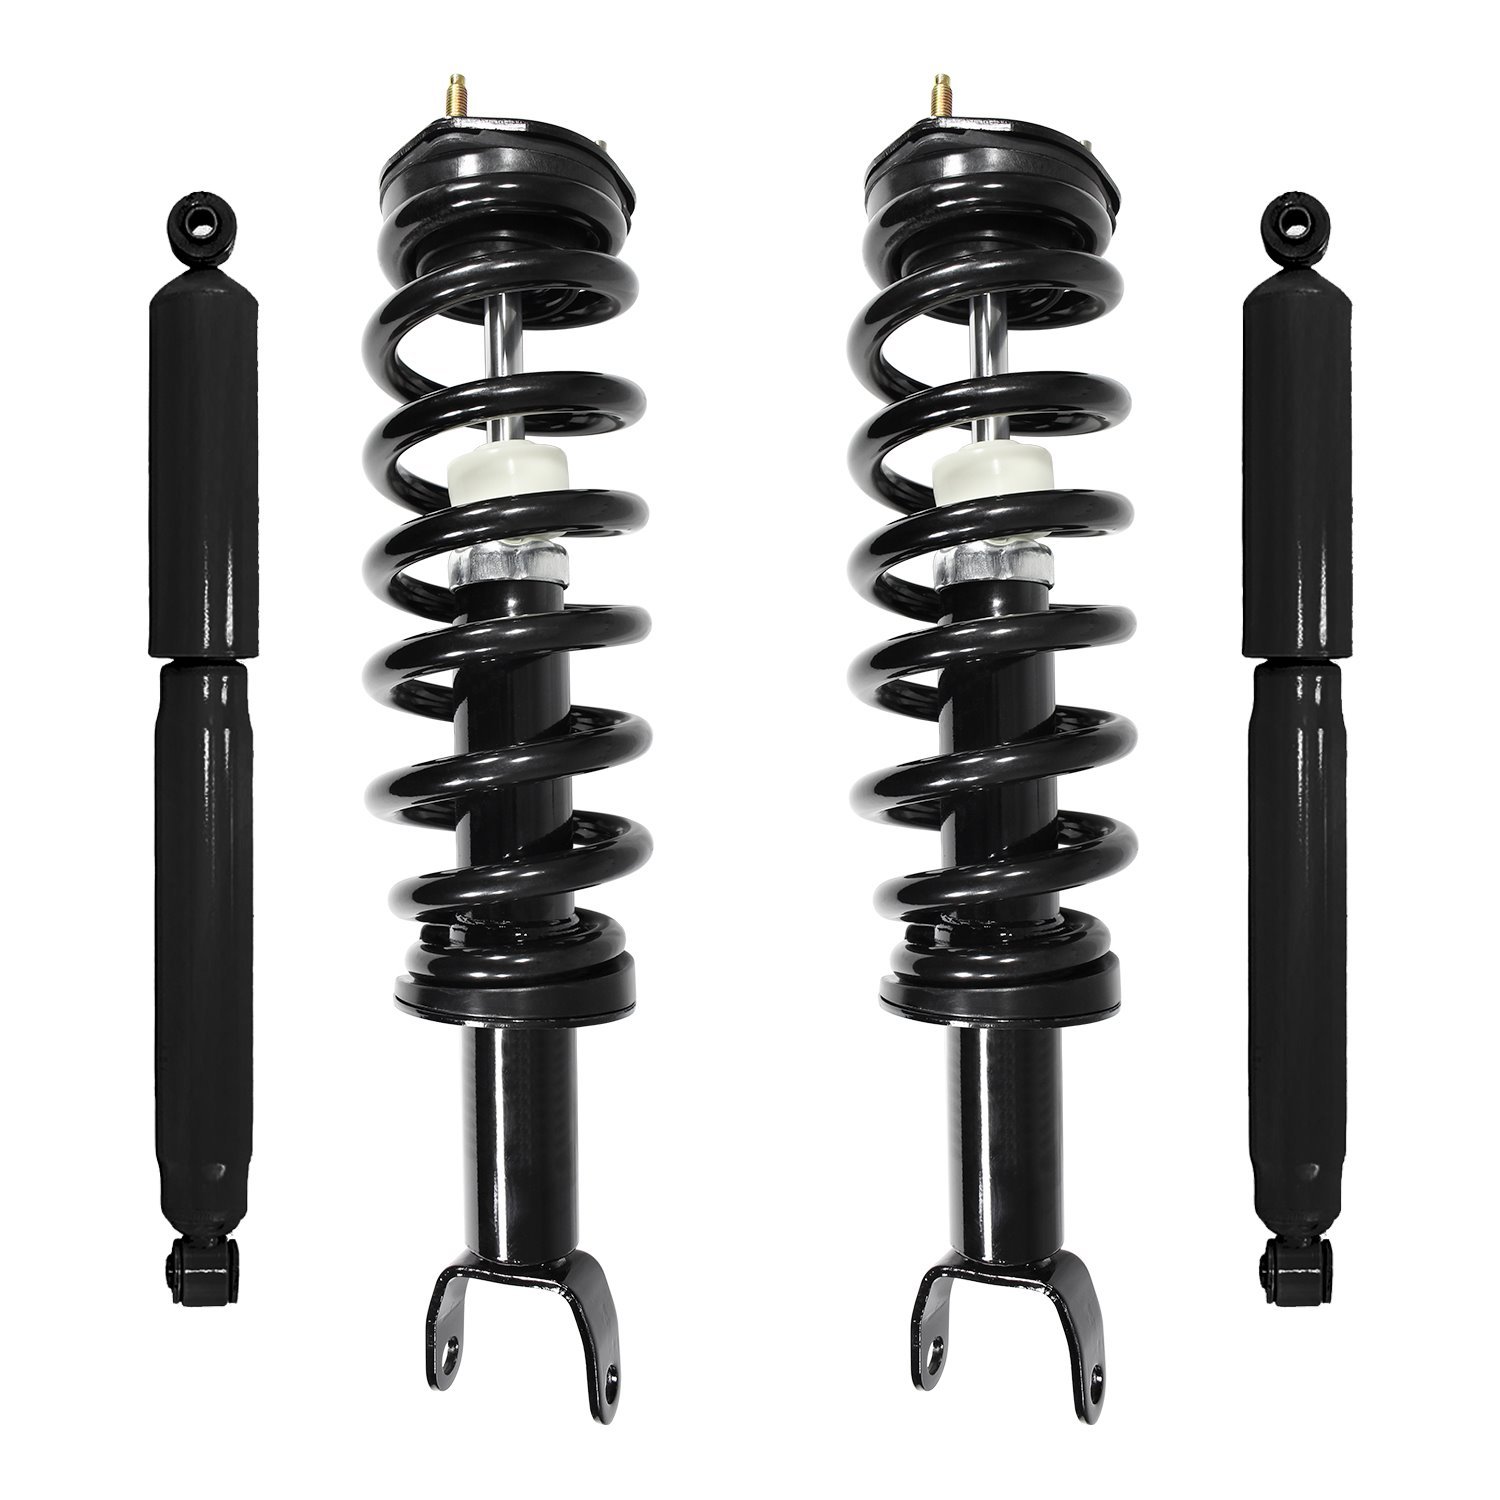 4-11620-256300-001 Front & Rear Suspension Strut & Coil Spring Assembly Fits Select Ram 1500, Ram 1500 Classic, Dodge Ram 1500